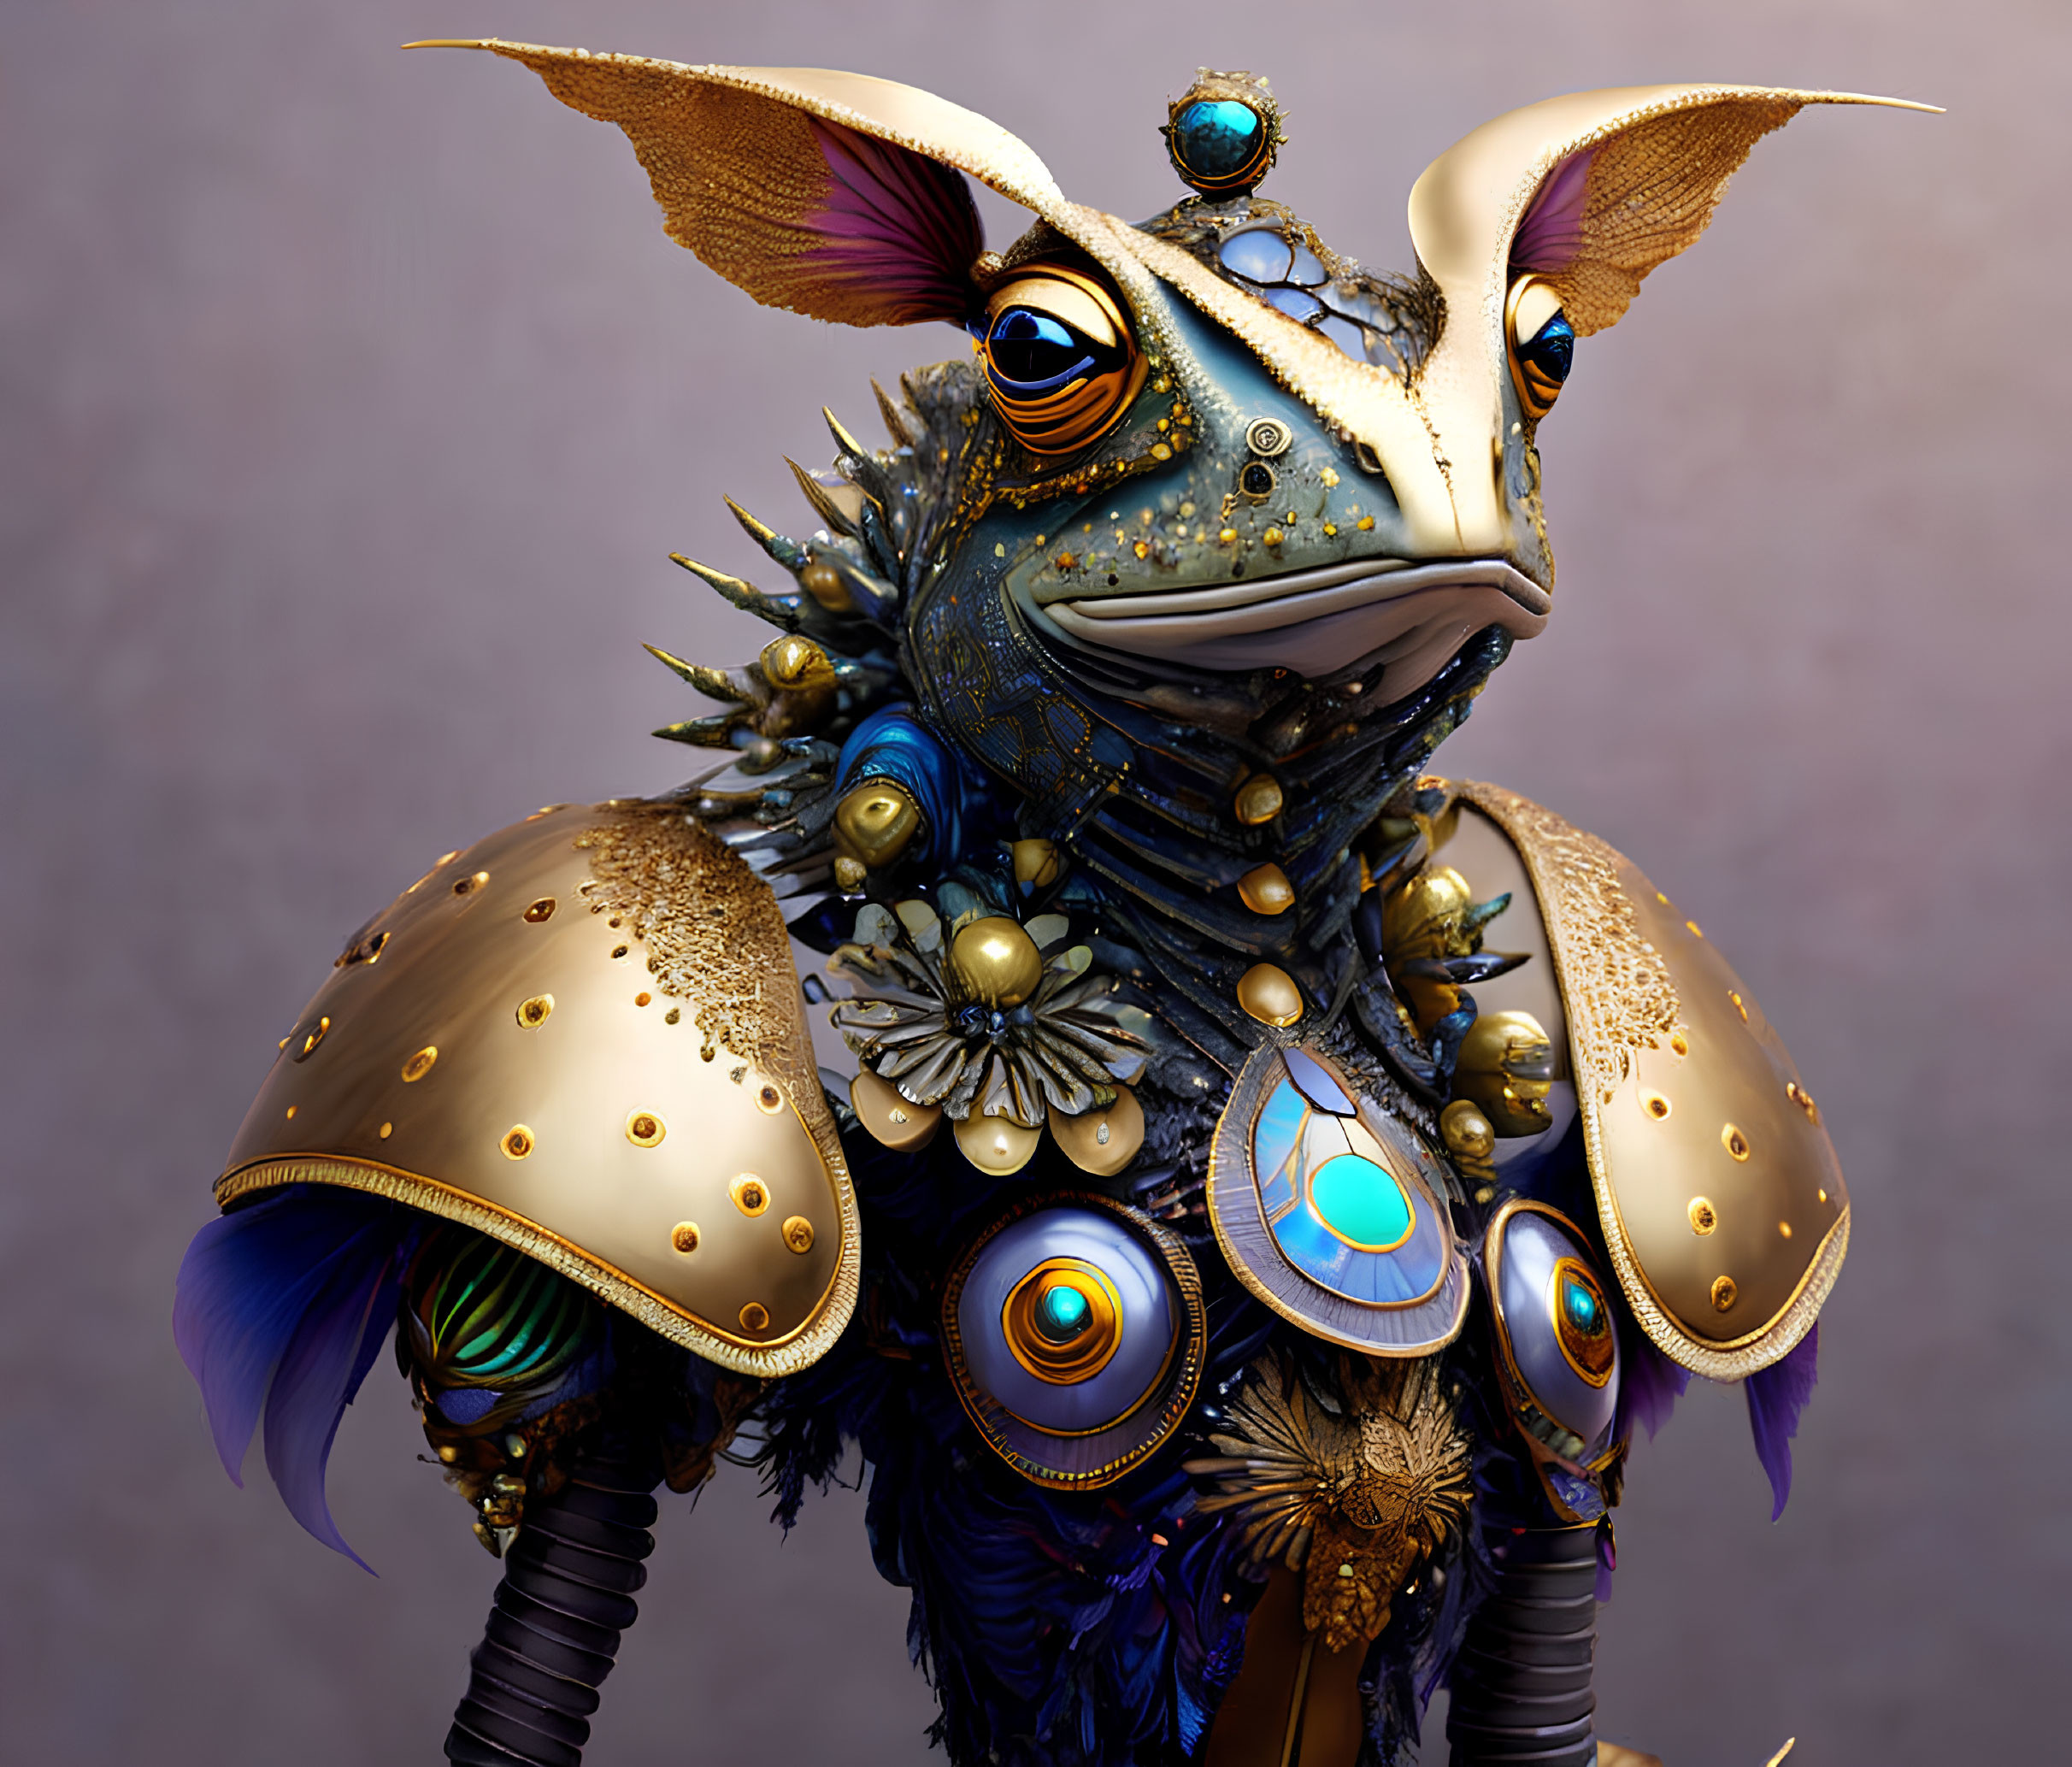 Blue-skinned digital creature with multiple eyes and golden armor - a whimsical blend of amphibian and